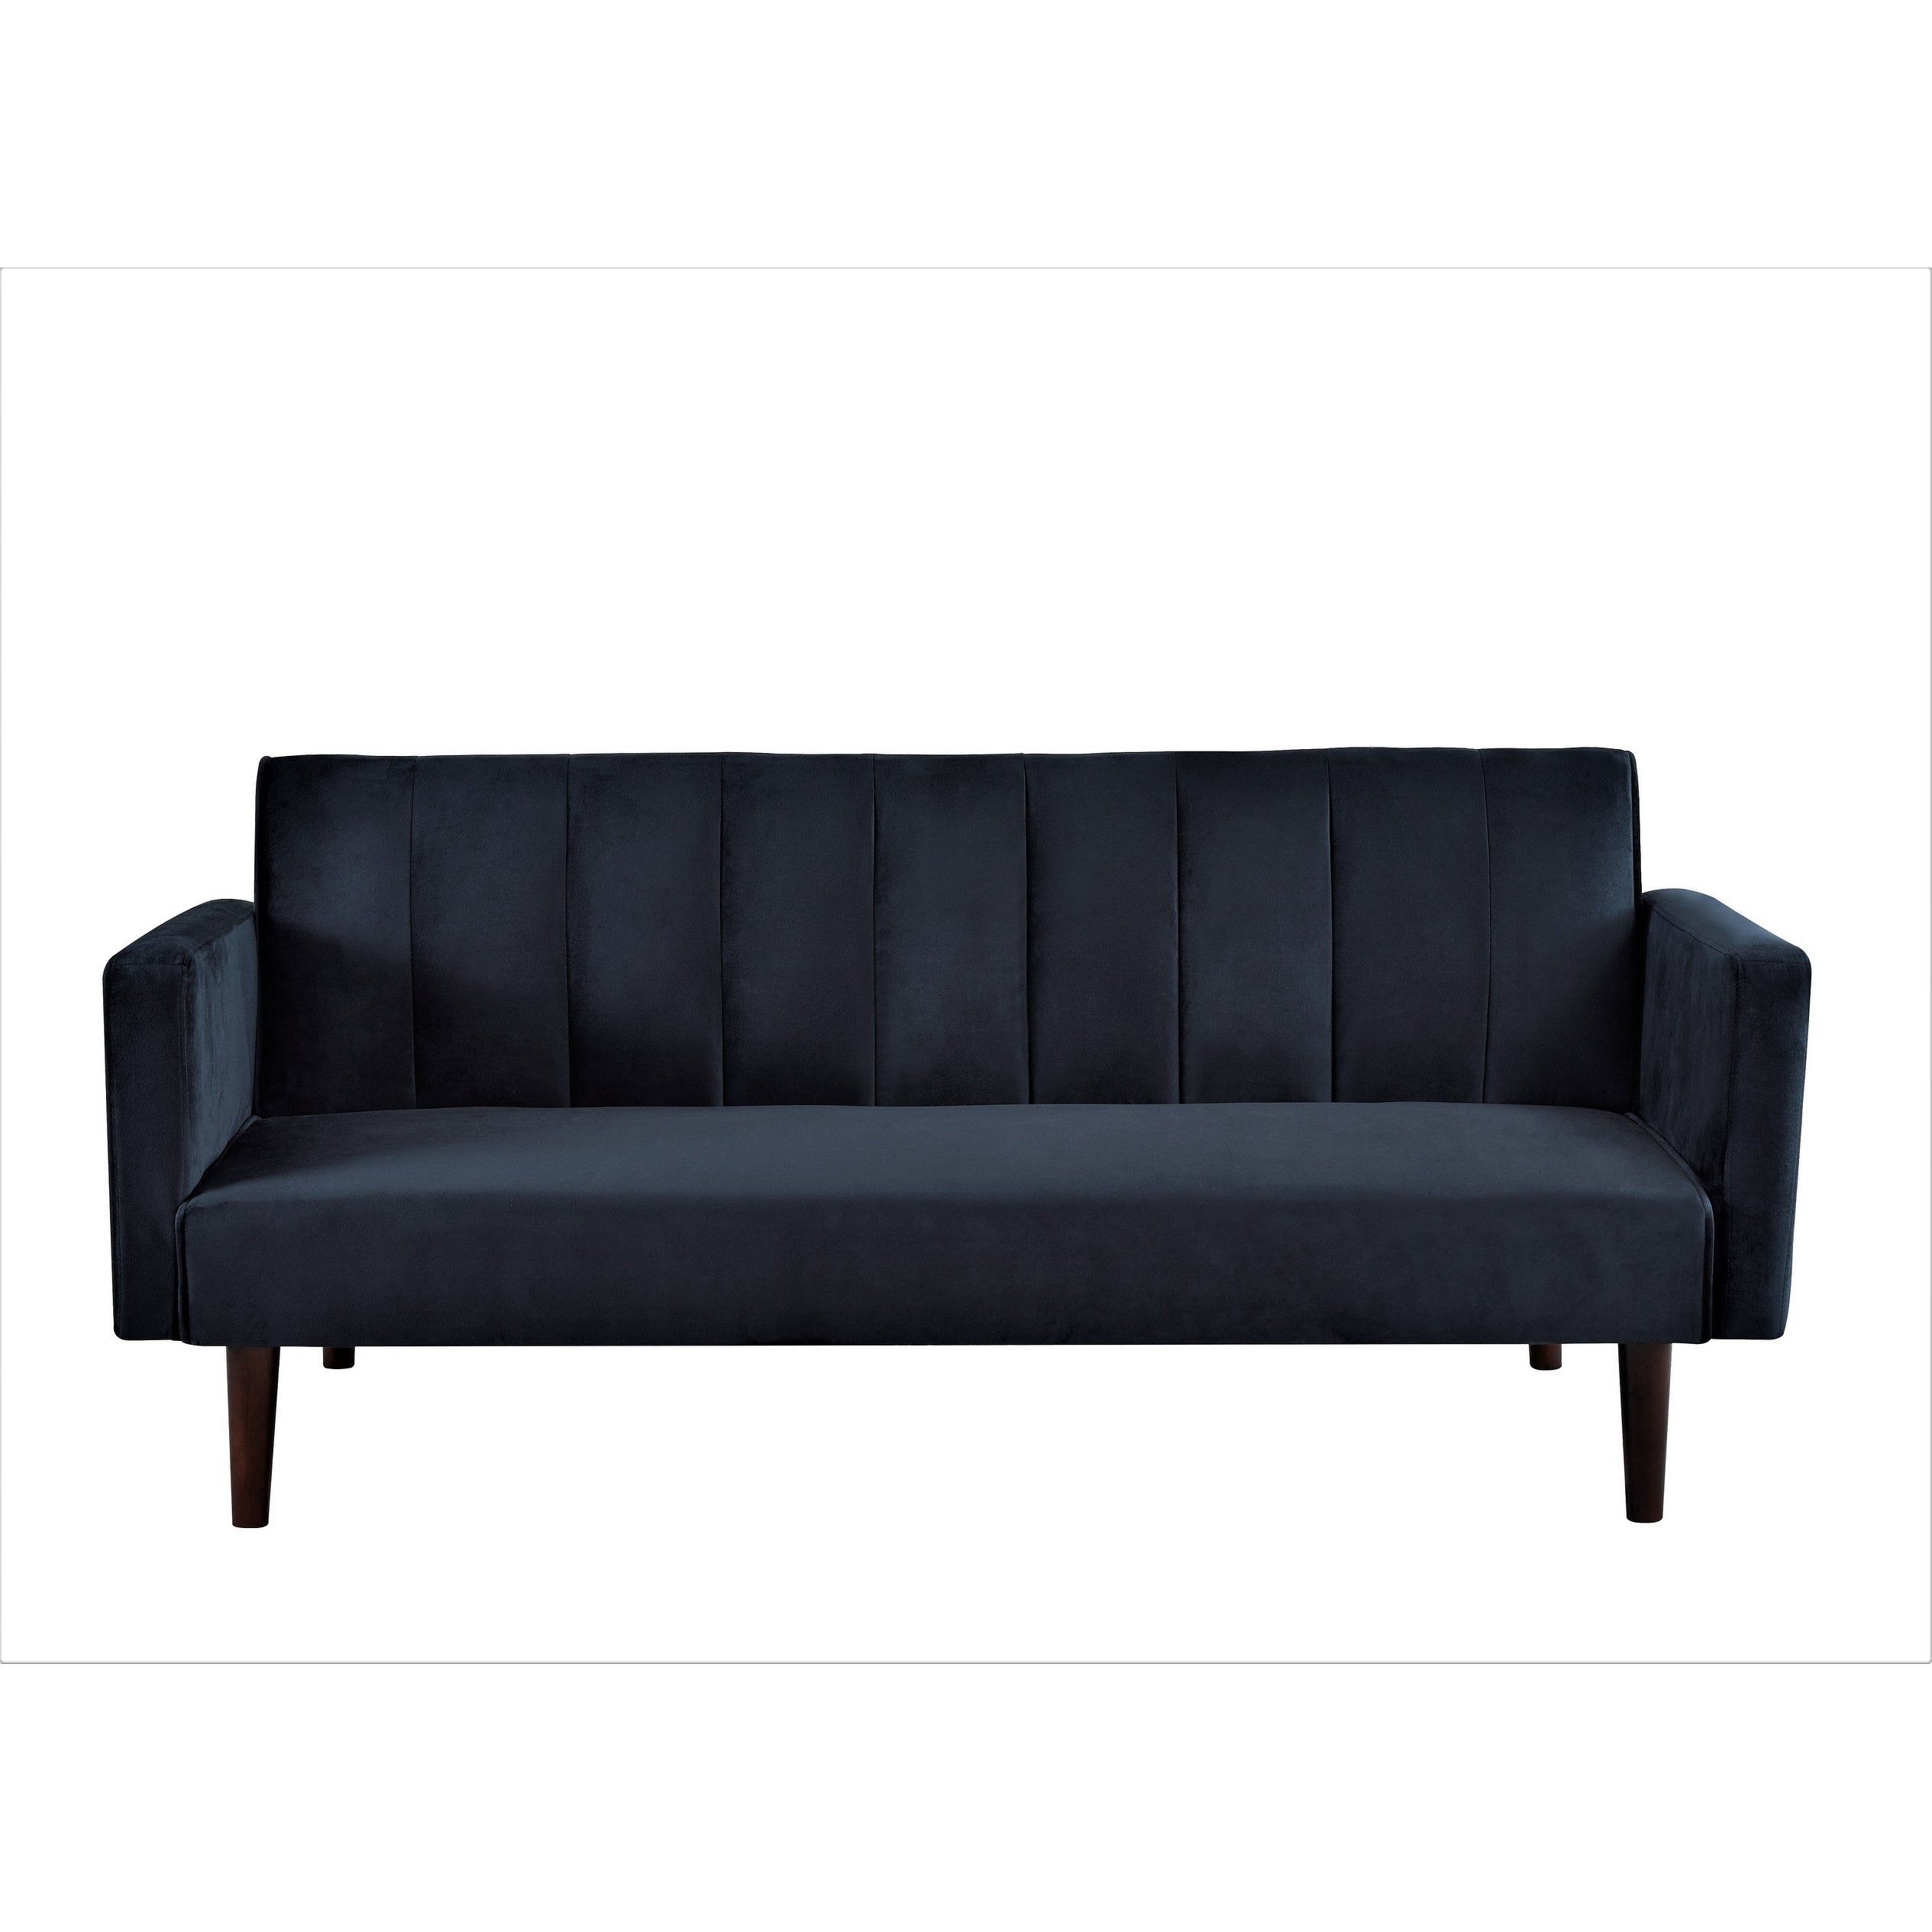 Our Best Living Room Furniture Deals | Velvet Sofa Bed, Sofa Bed With Regard To 66" Convertible Velvet Sofa Beds (View 17 of 20)